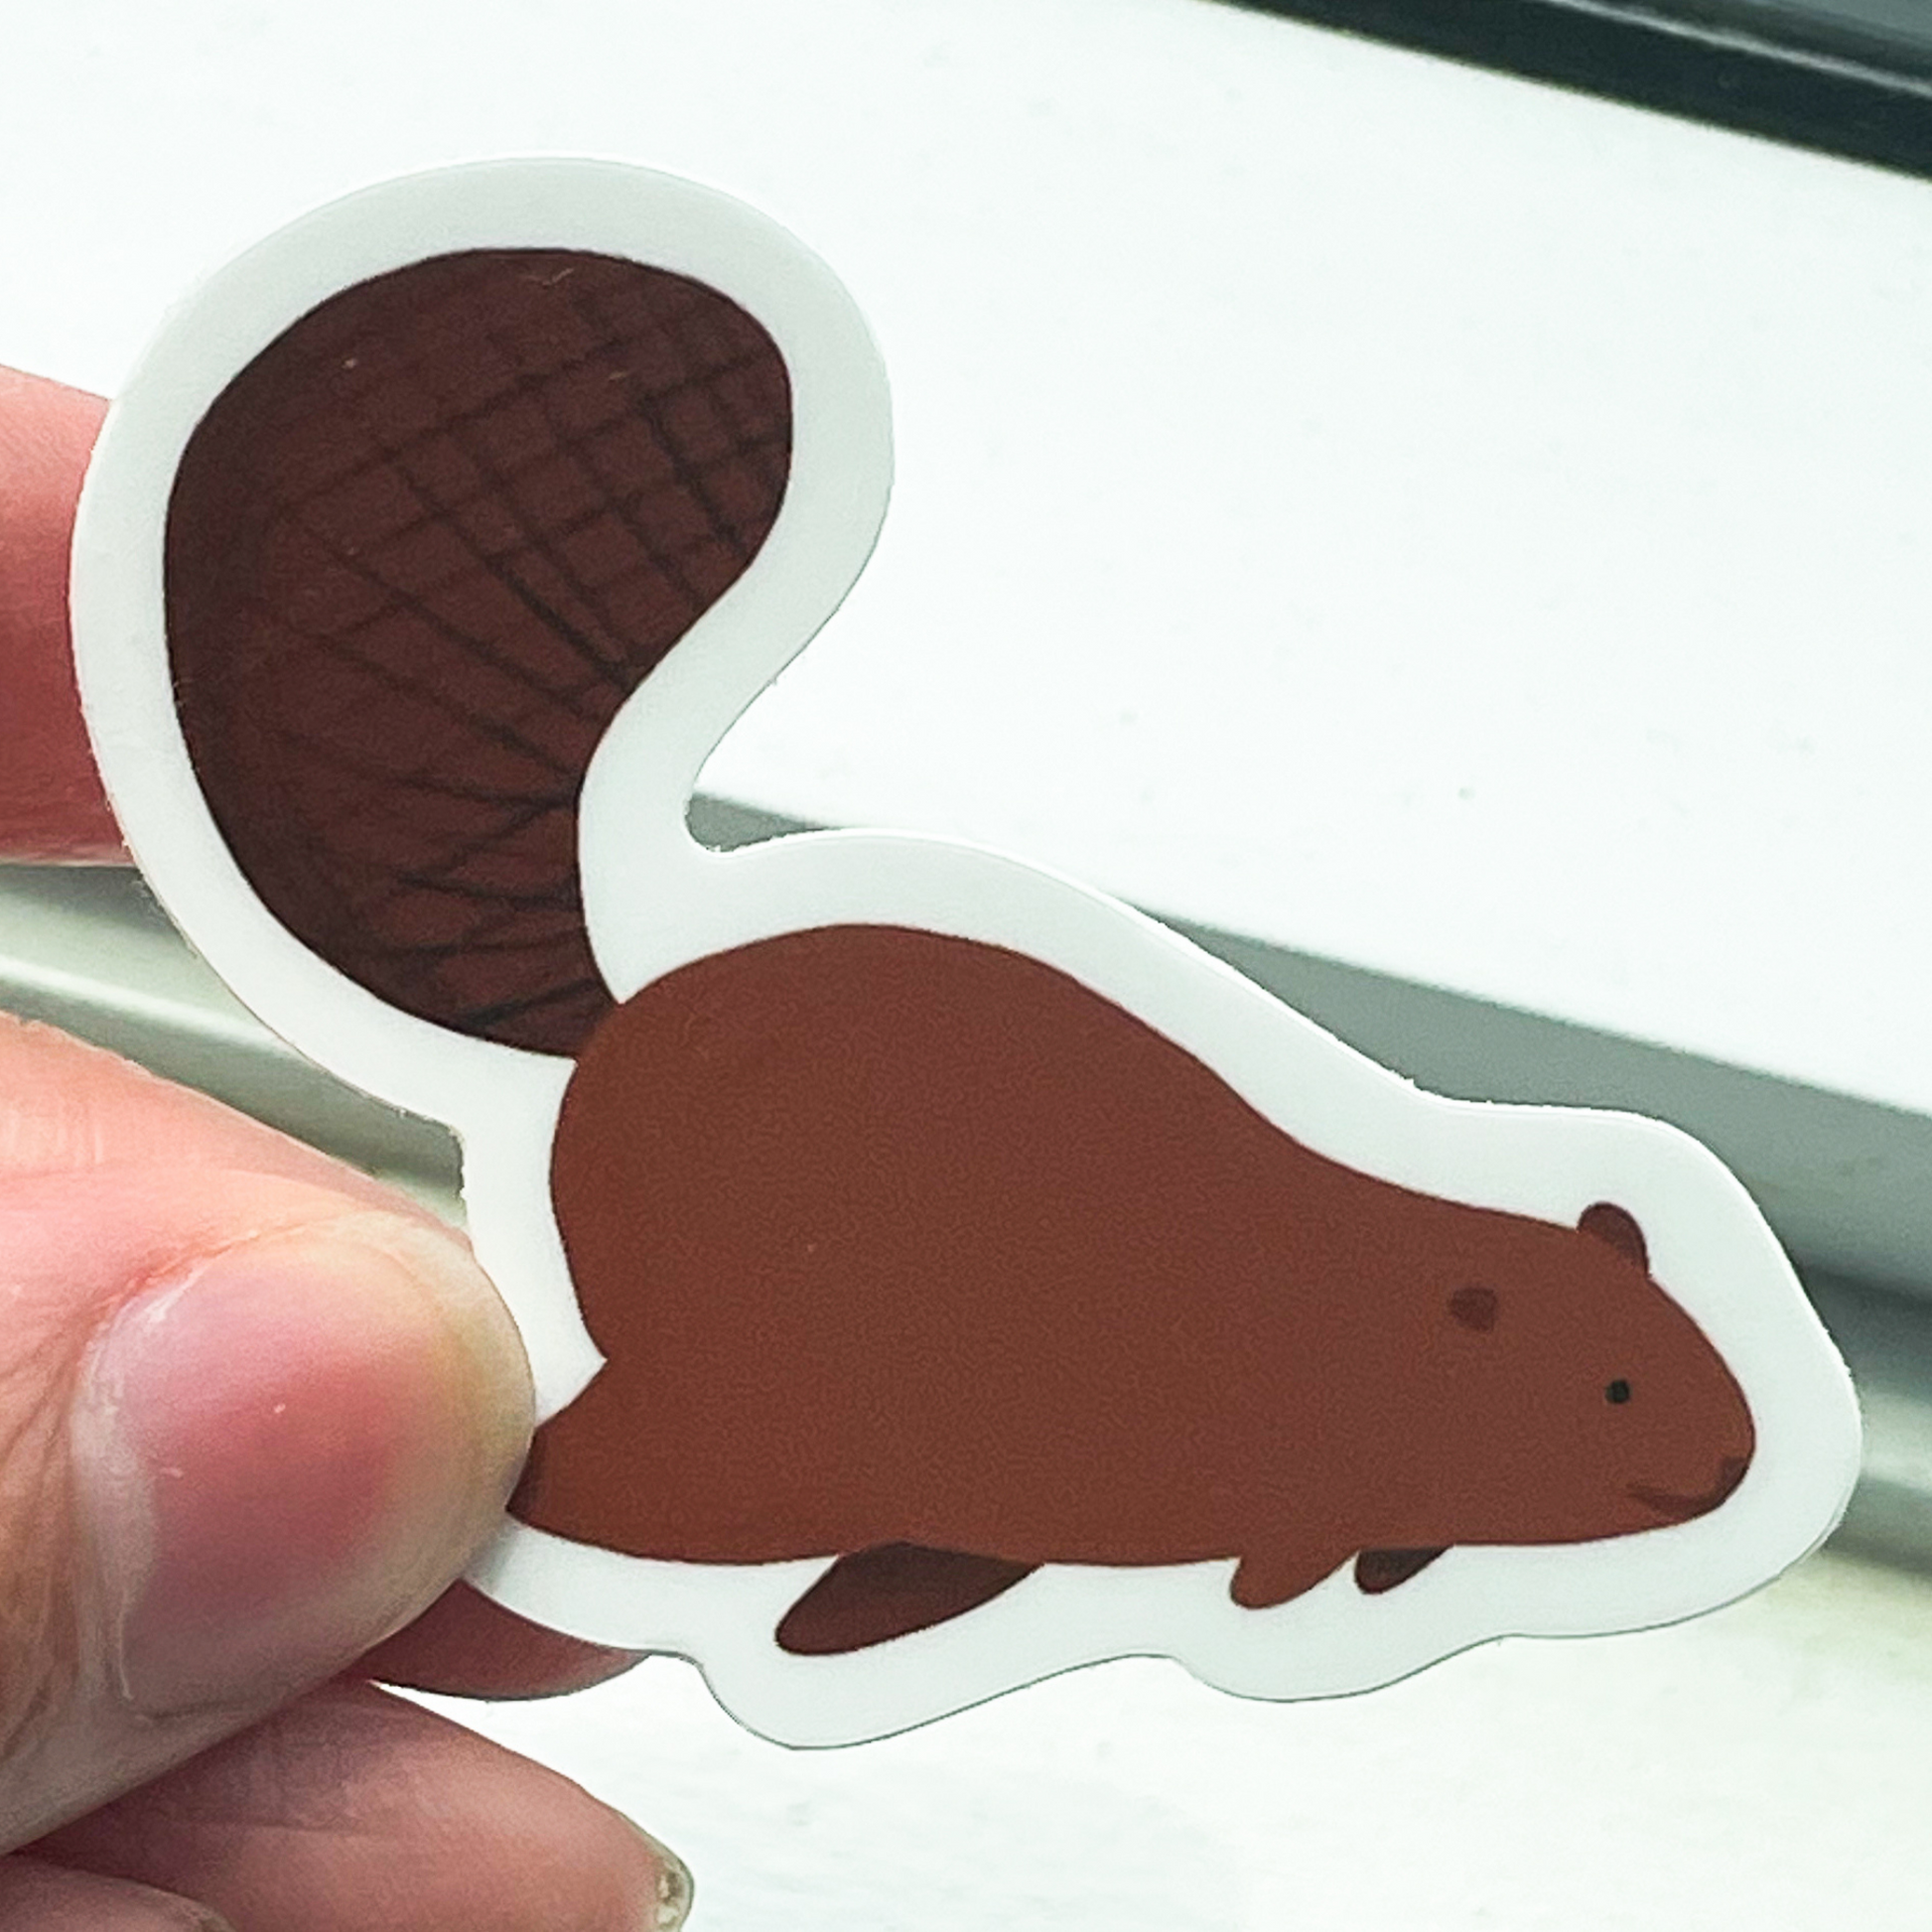 A white window sill background. In the front a hand is holding a smiling brown beaver sticker.